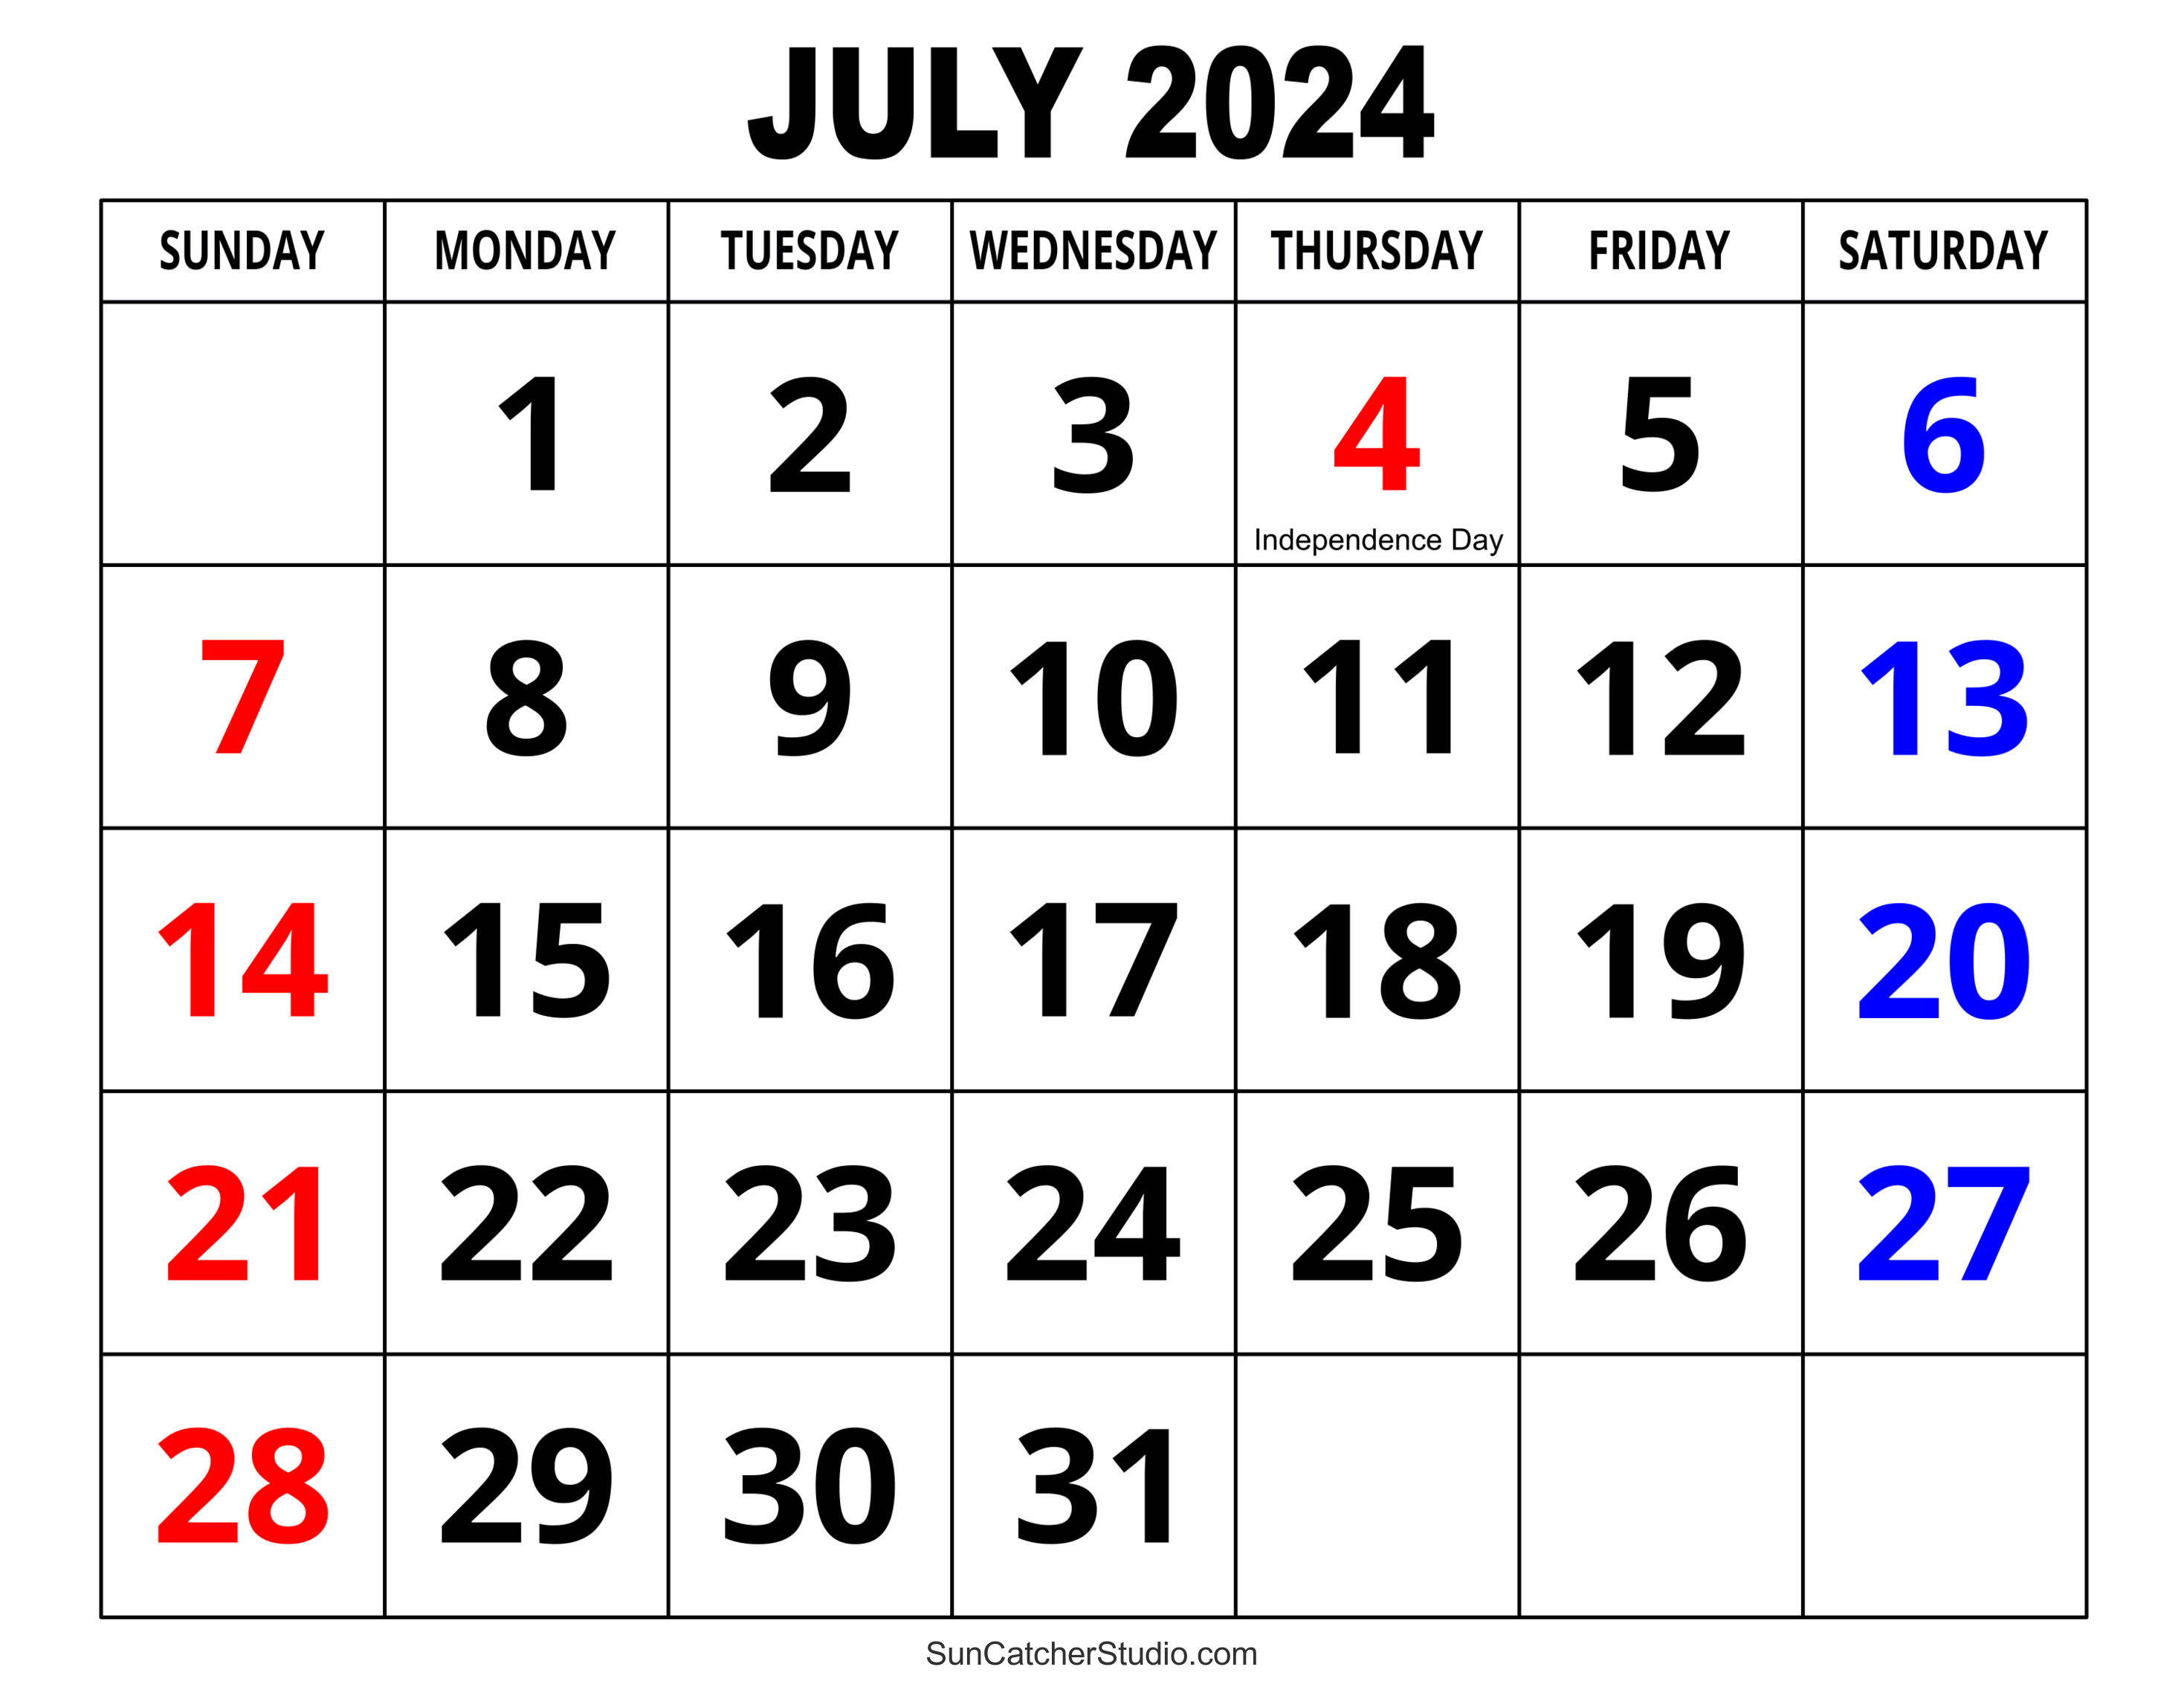 July 2024 Calendar (Free Printable) – Diy Projects, Patterns inside Calendar For July 2024 With Holidays